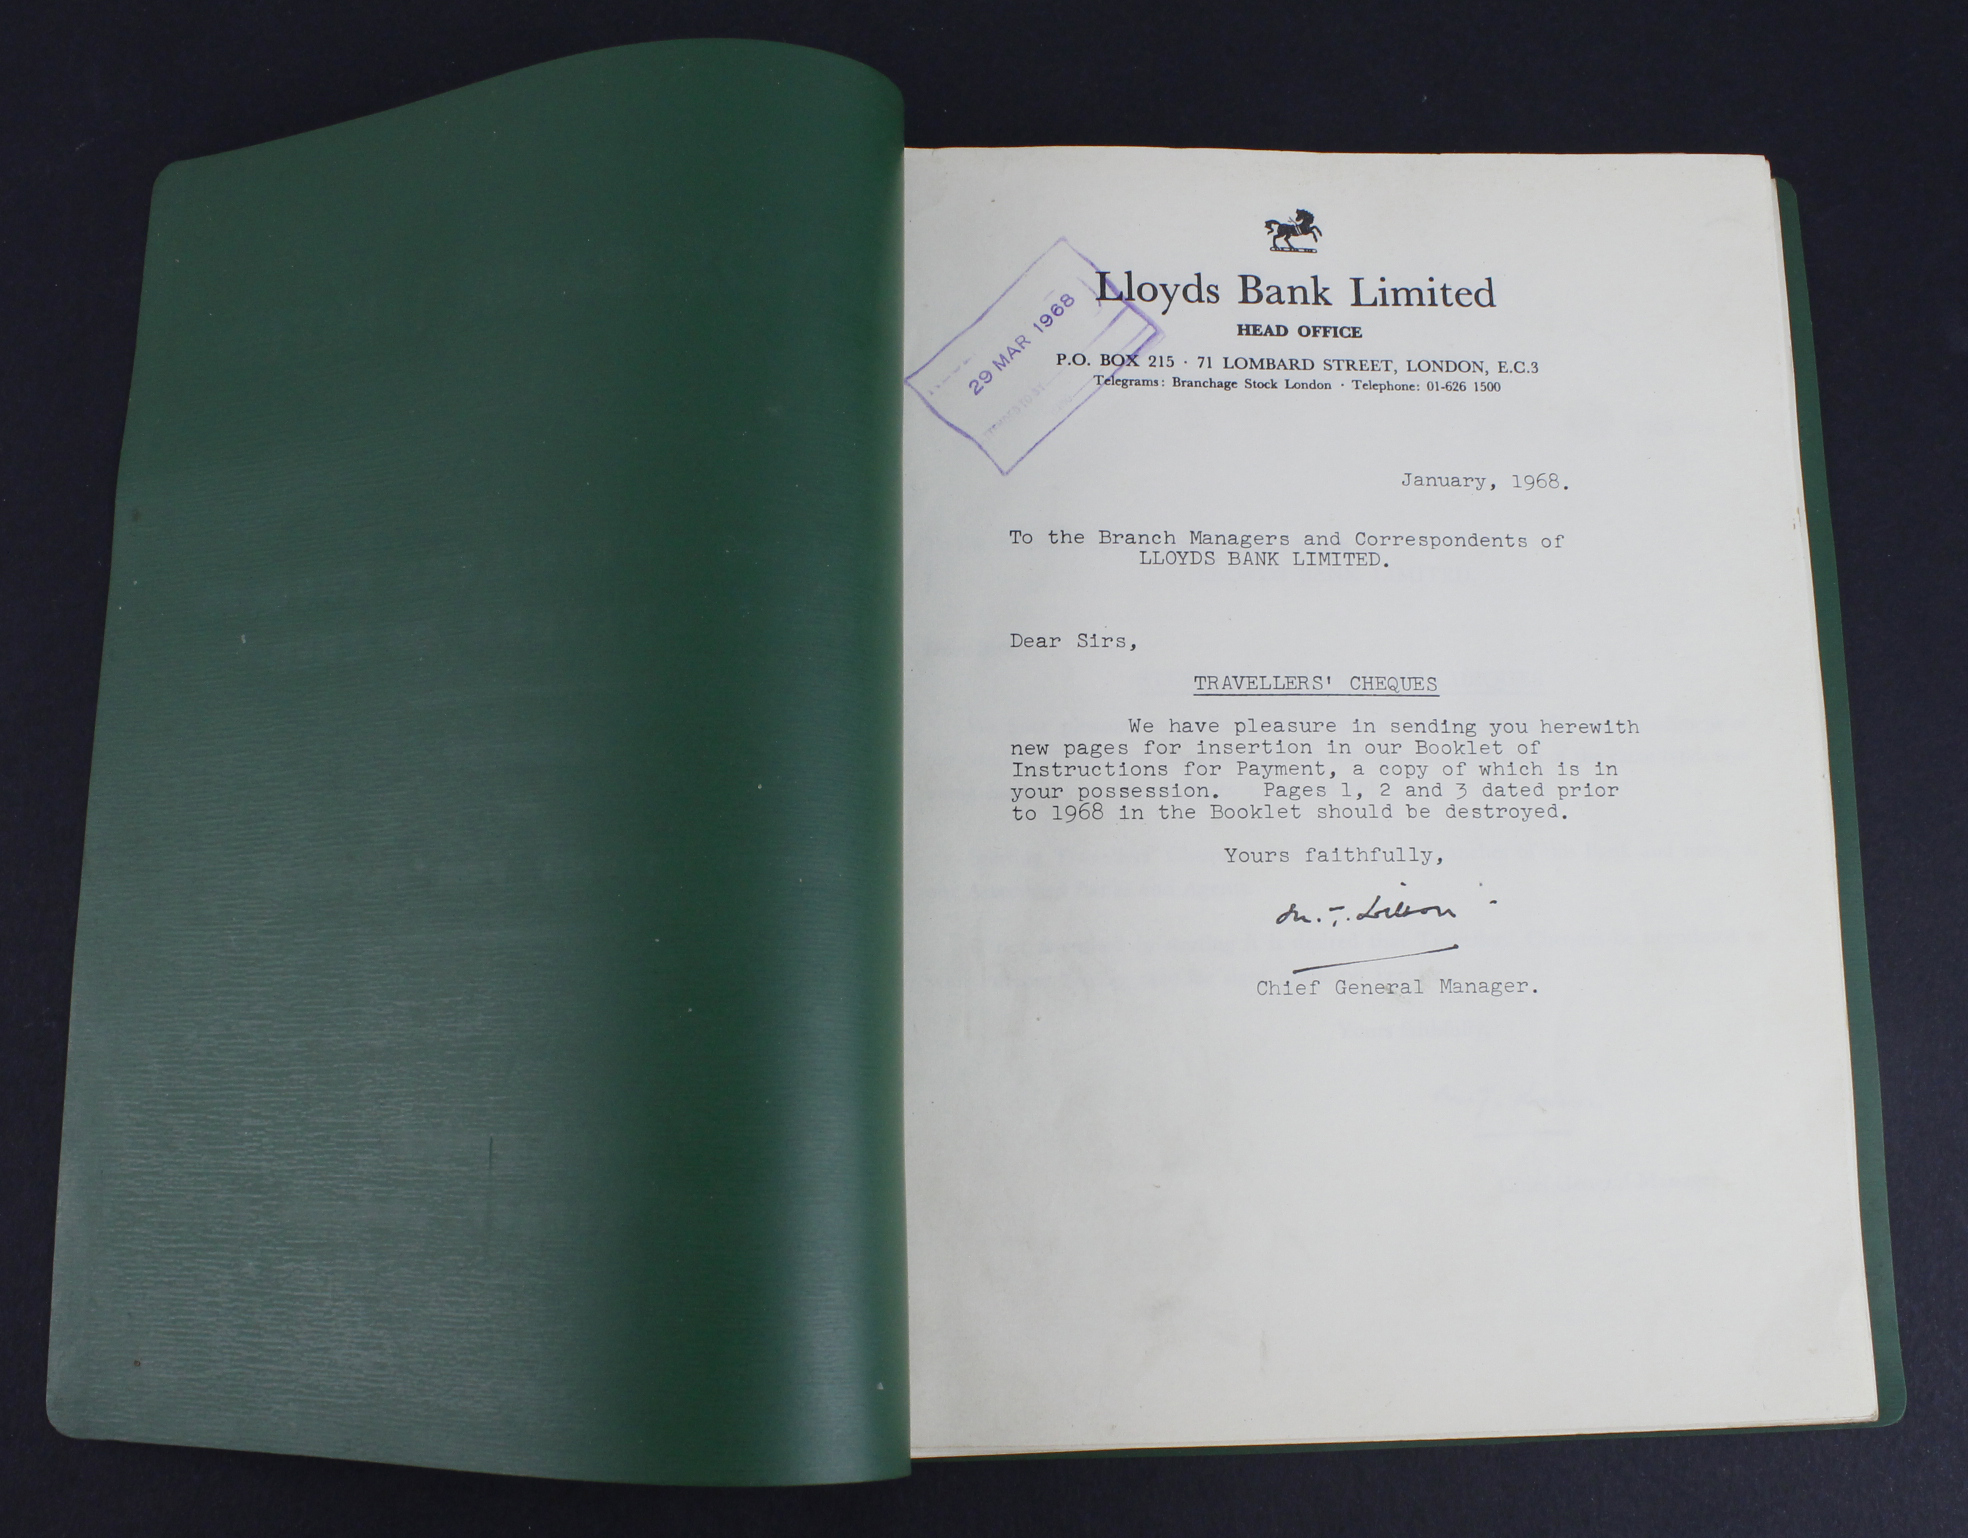 Lloyds Bank, a Booklet of Instructions for Payment of Sterling Travellers Cheques and World